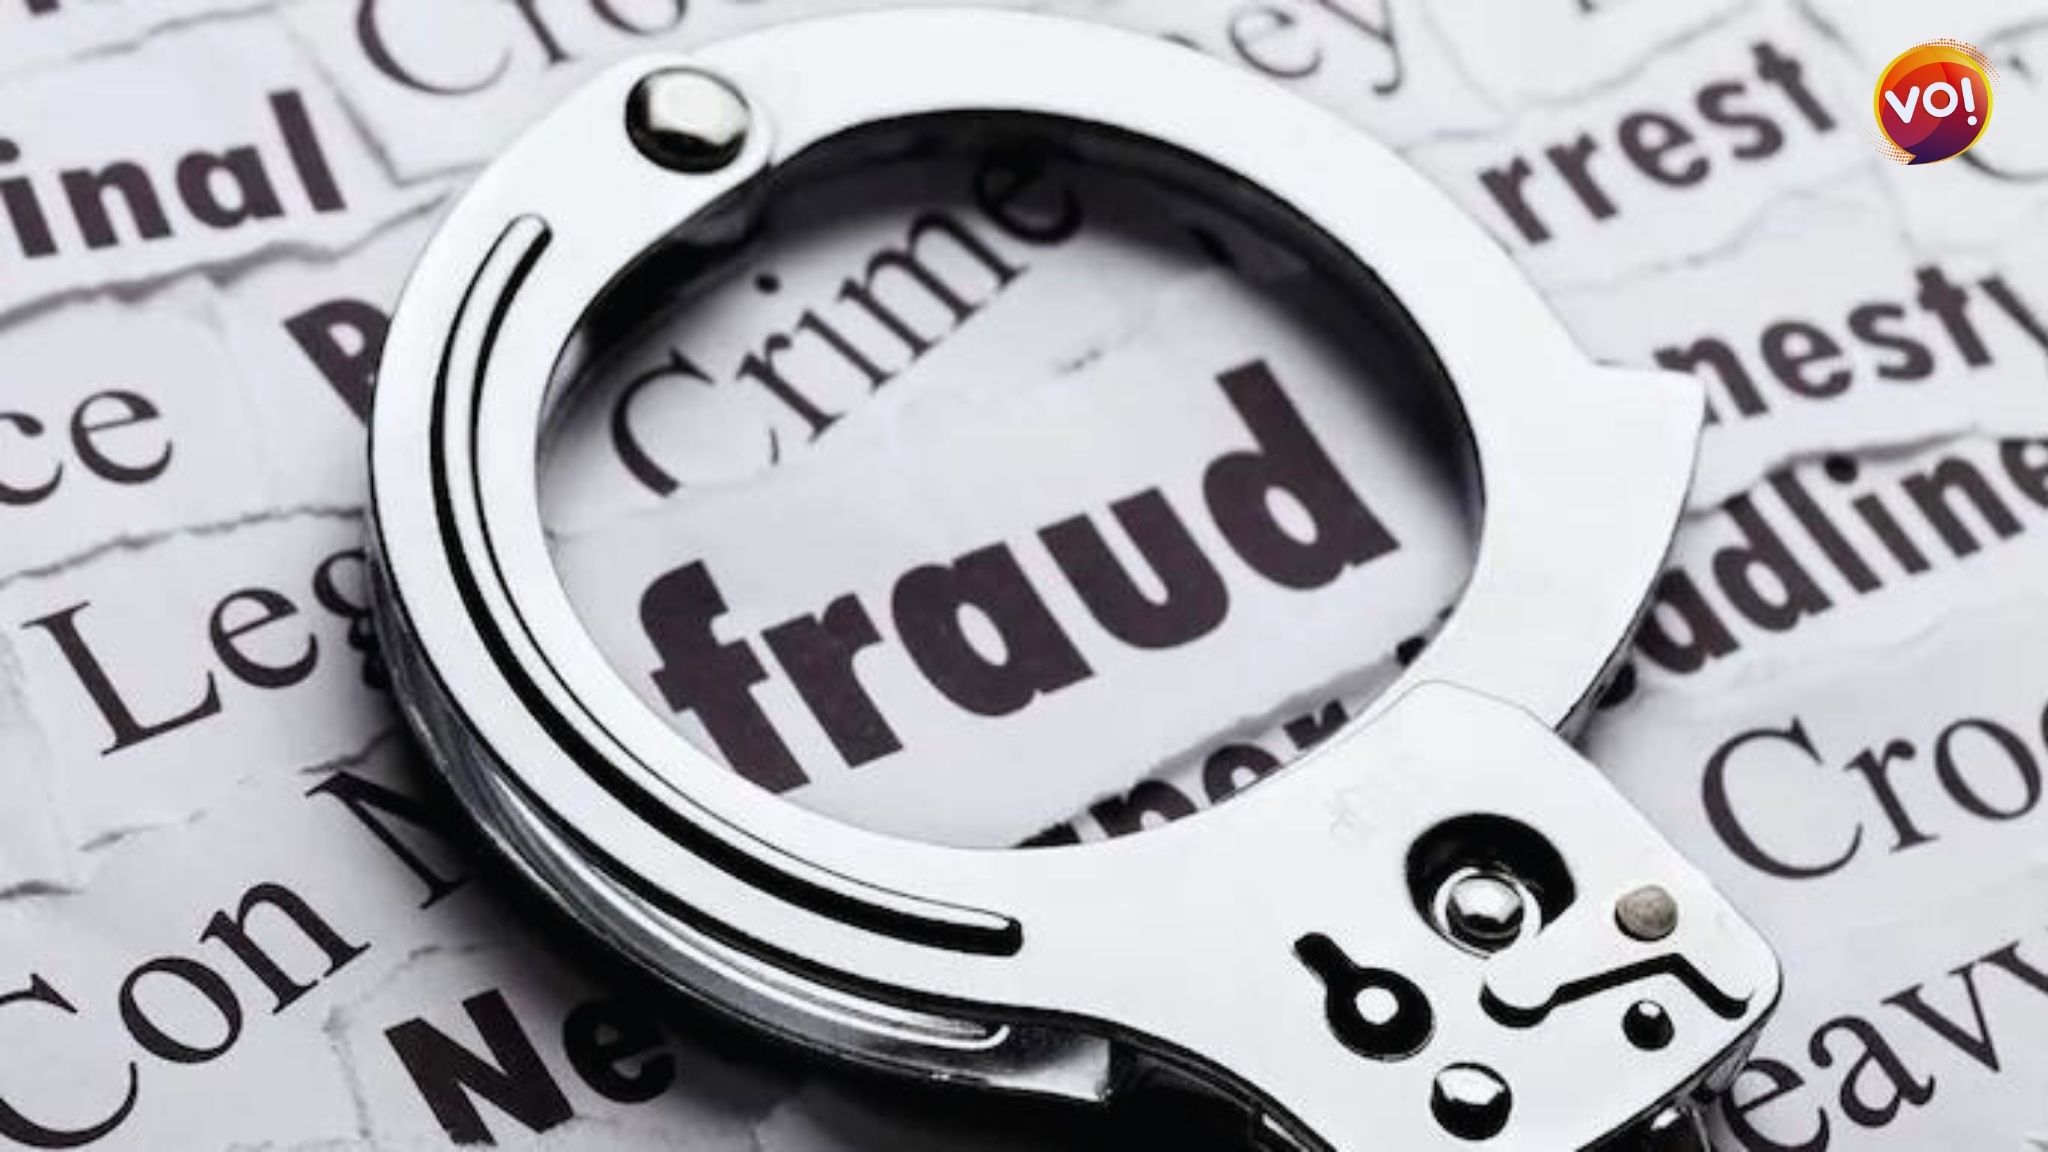 Man Duped 34 Investors Of Rs 3 Crore Using A Fake Name